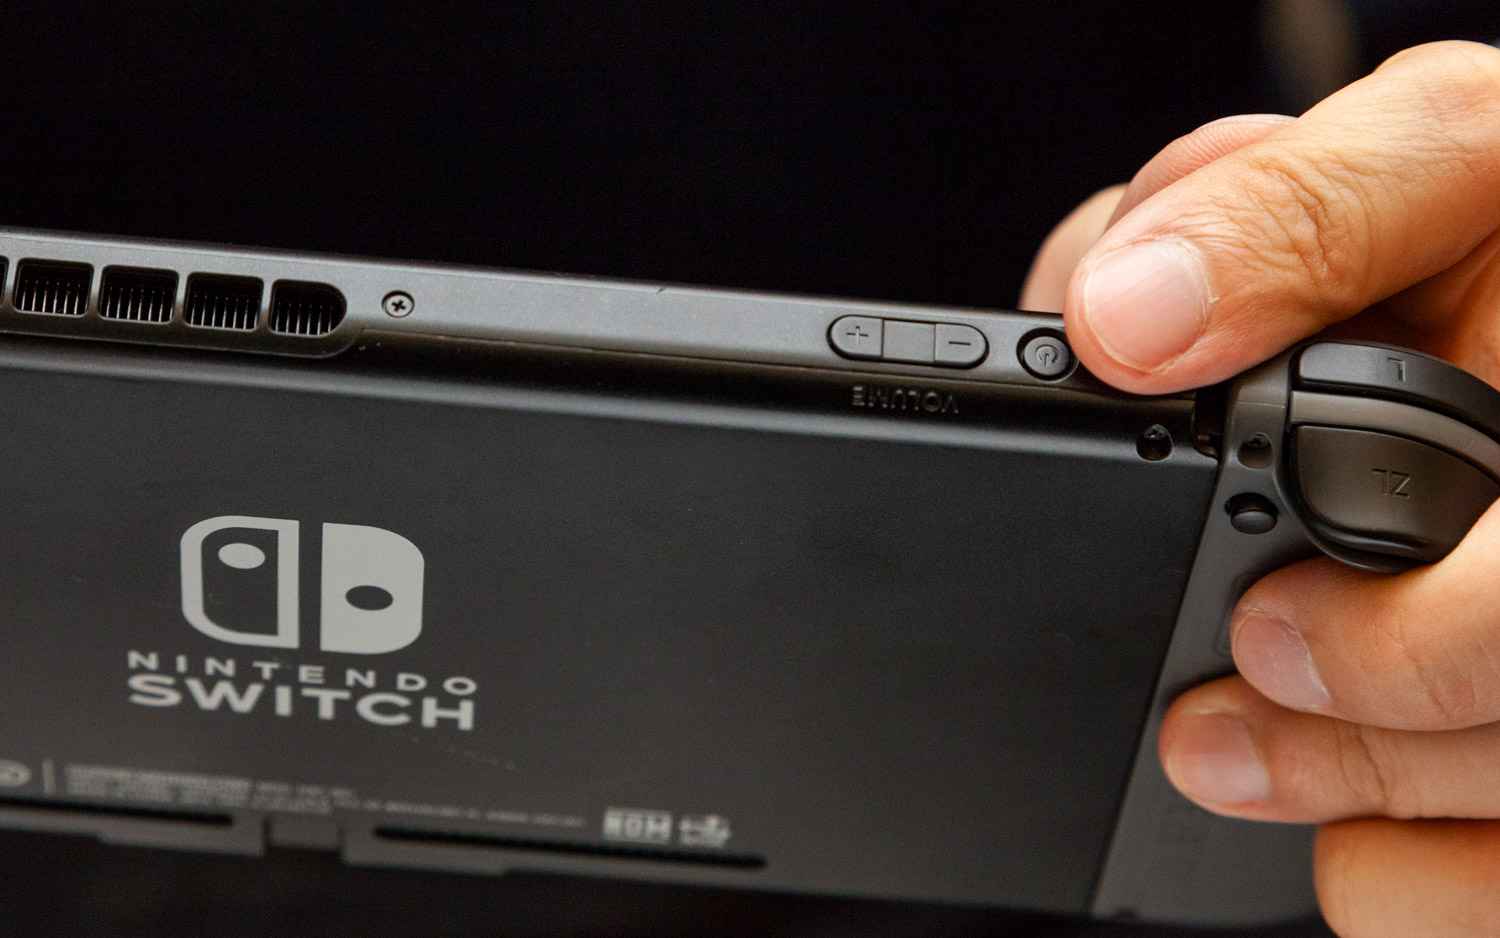 press the power button to turn on the Switch console